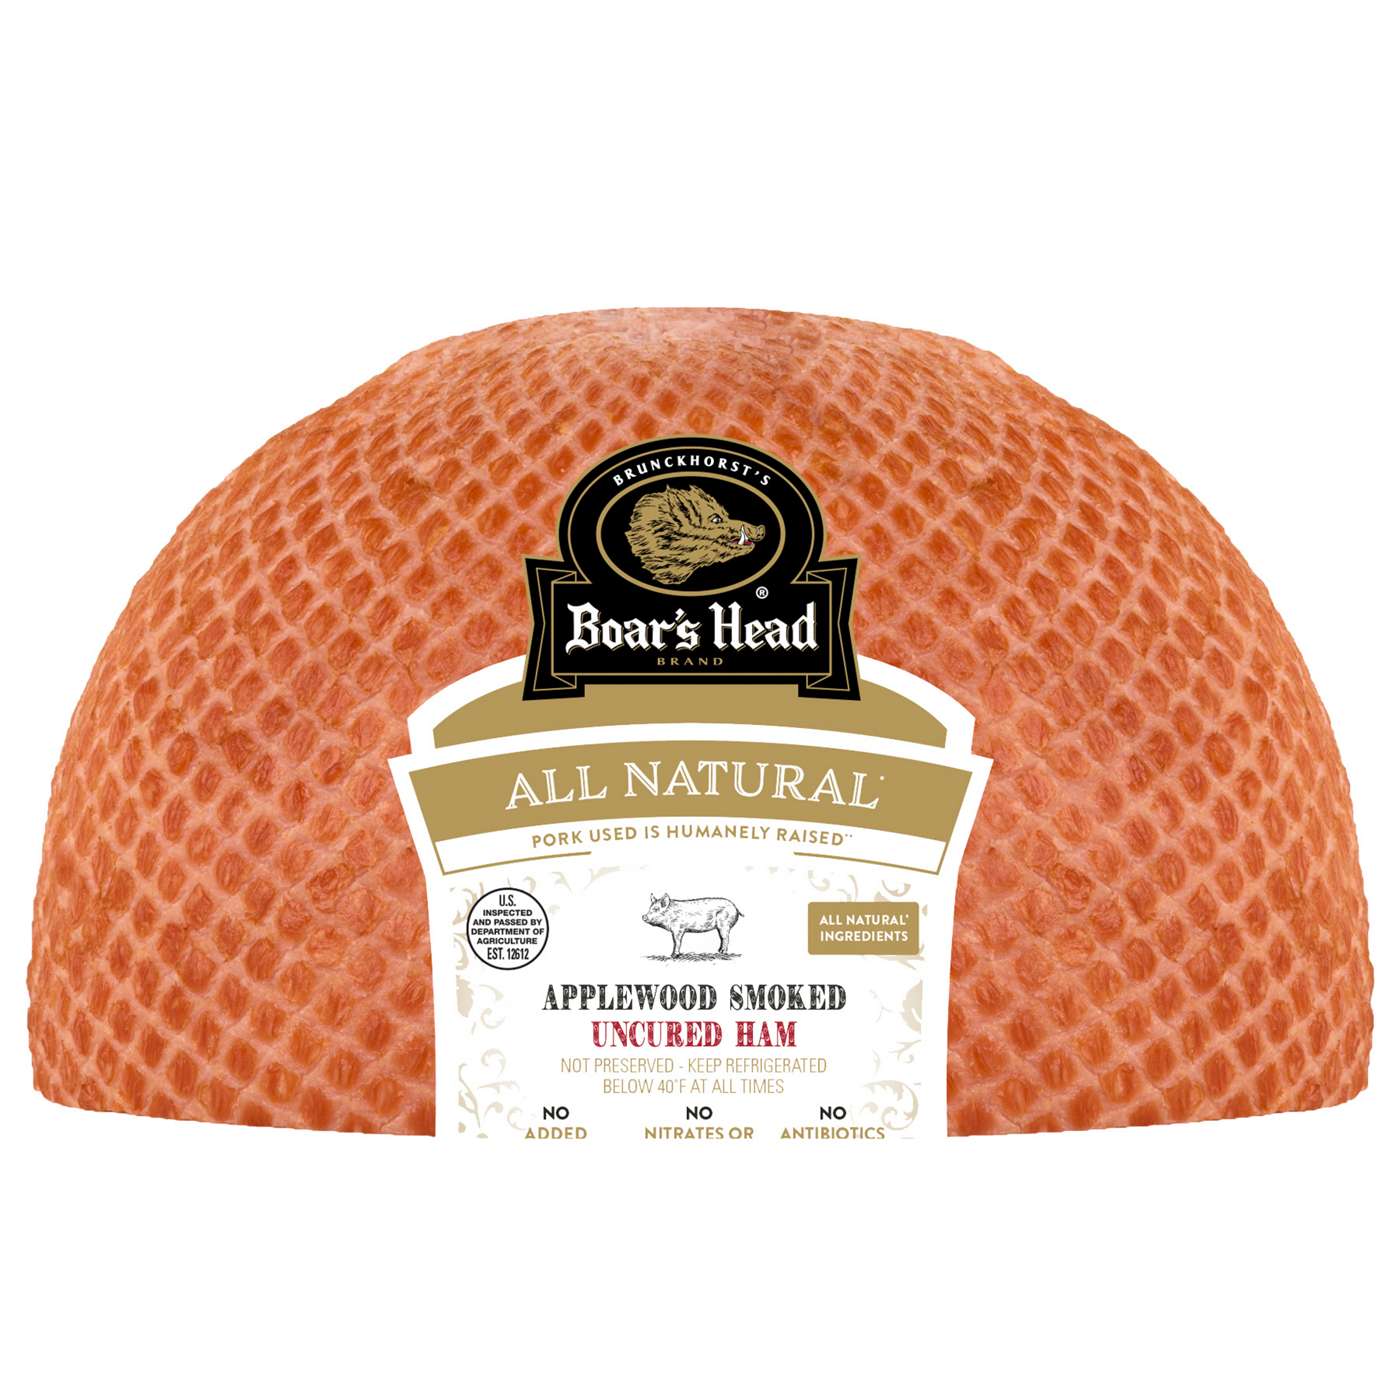 Boar's Head All Natural Applewood-Smoked Uncured Ham, Custom Sliced; image 1 of 2